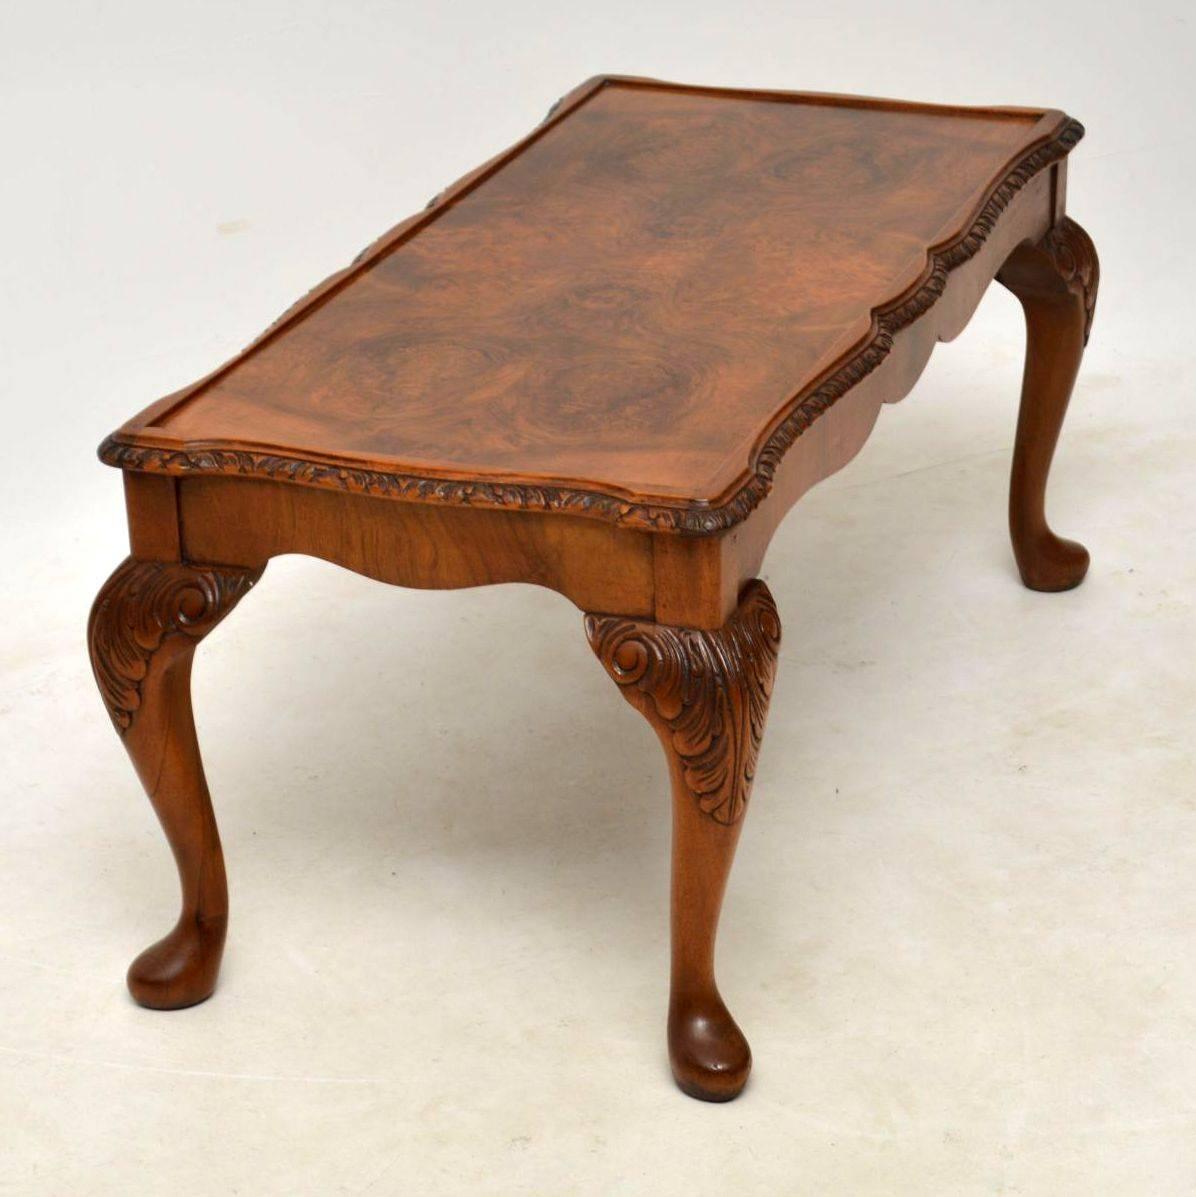 Fine quality antique walnut coffee table with a burr walnut top and a shaped carved top edge. The border below is also shaped & the strong looking walnut legs are deeply carved on the tops. This coffee table is in excellent condition, having just